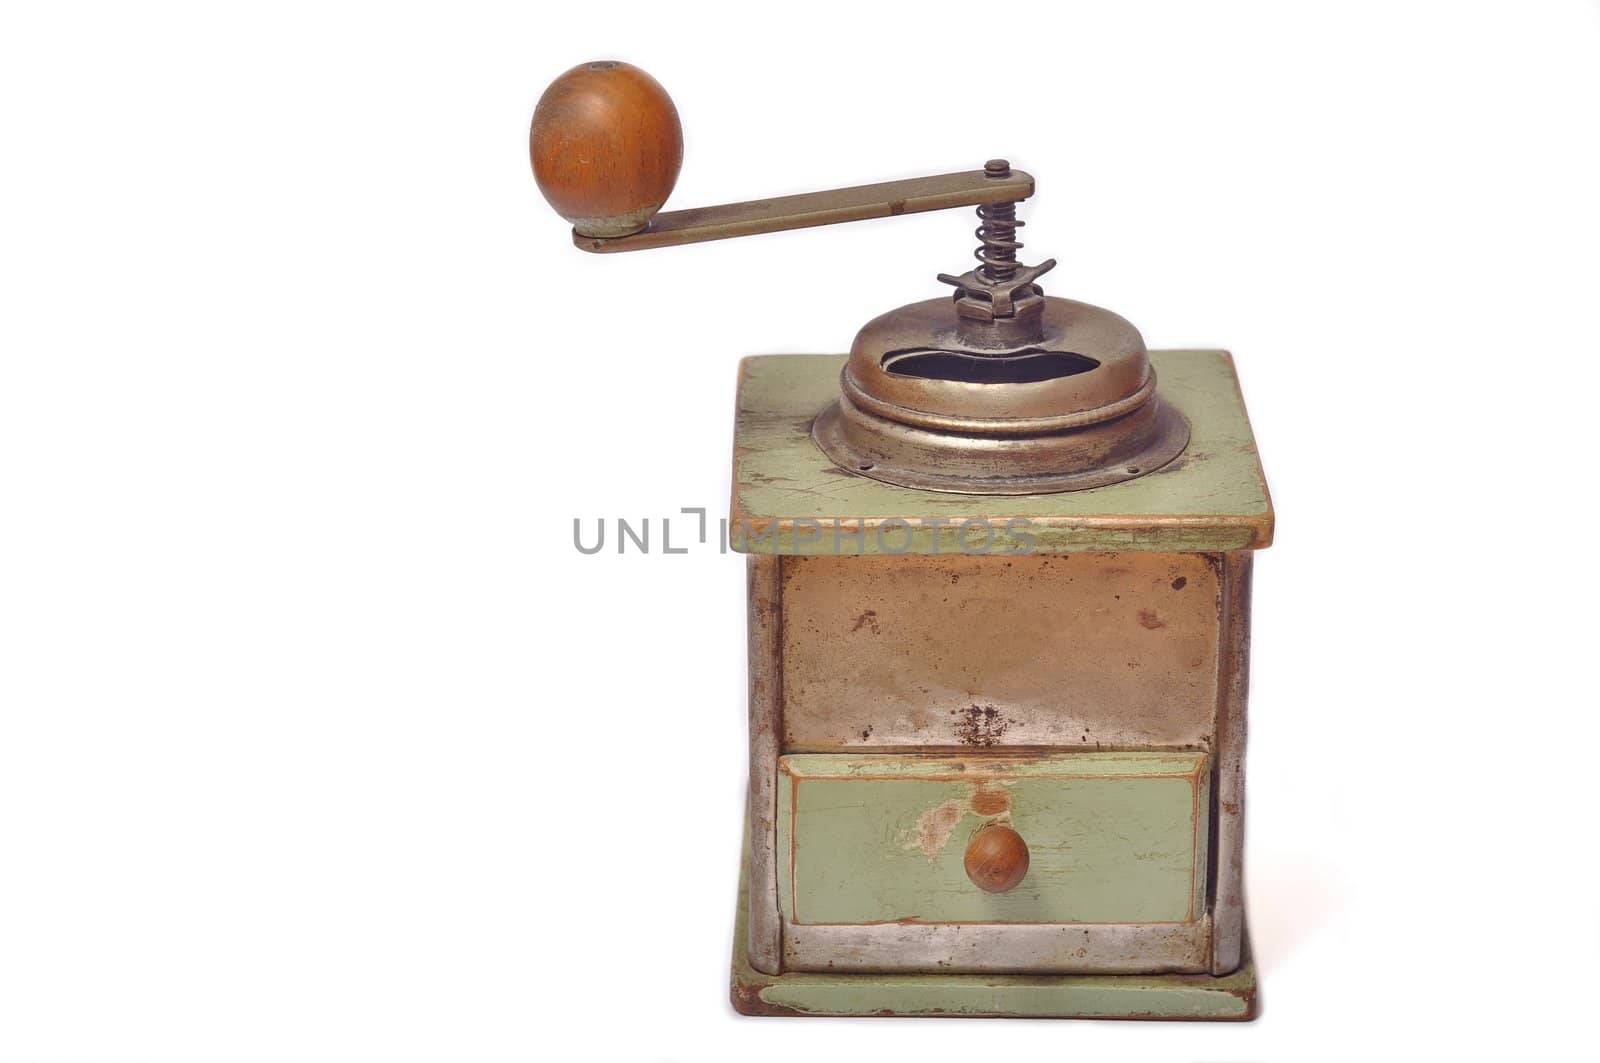 Coffee grinder, isolated